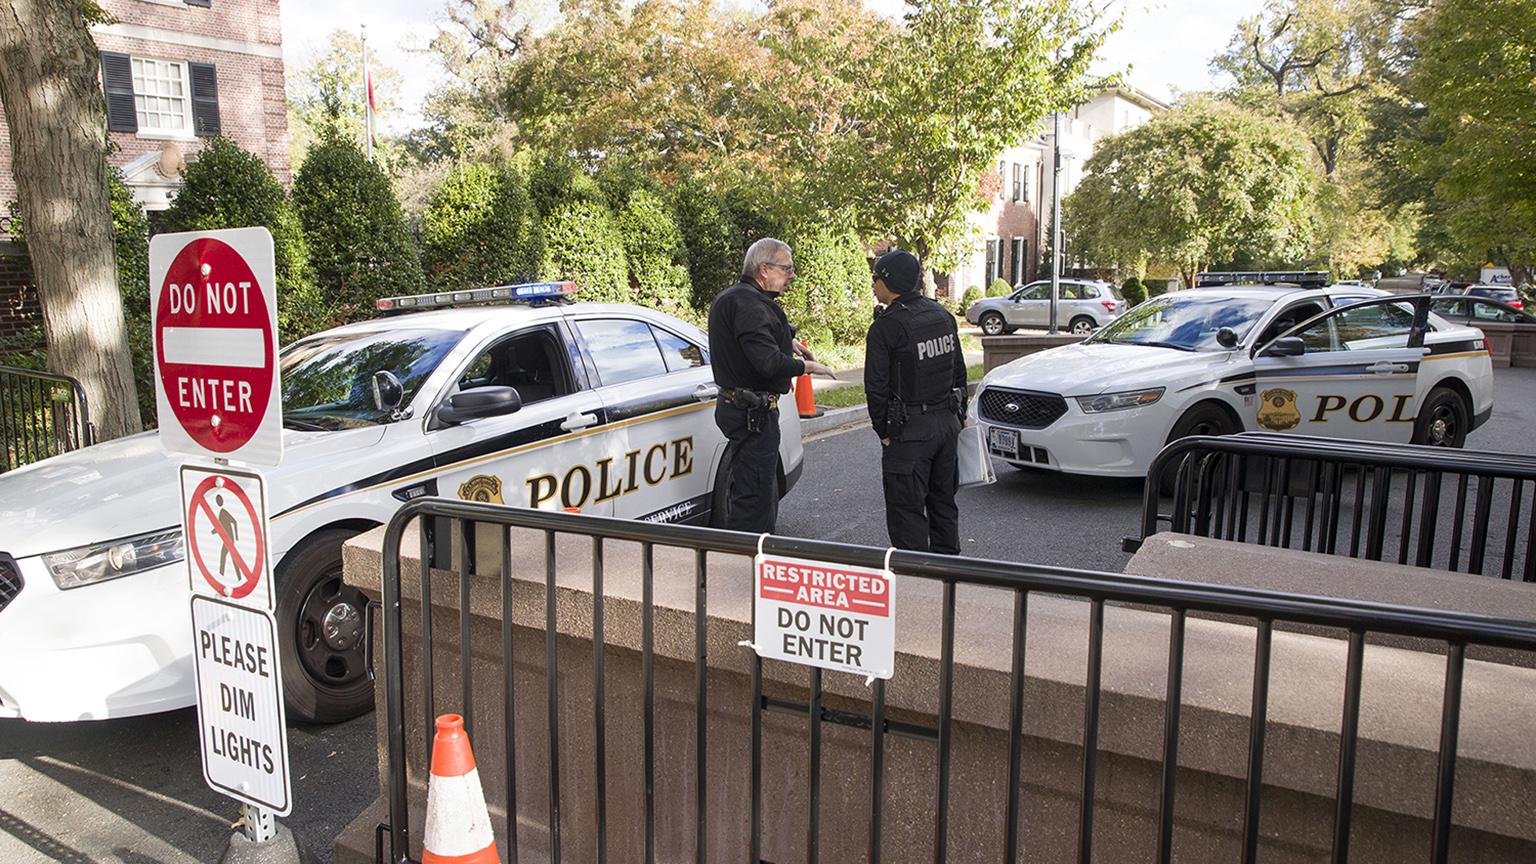 Officers with the Uniform Division of the United States Secret Service talk at a checkpoint near the home of former President Barack Obama on Wednesday, Oct. 24, 2018, in Washington, D.C. (AP Photo / Alex Brandon)